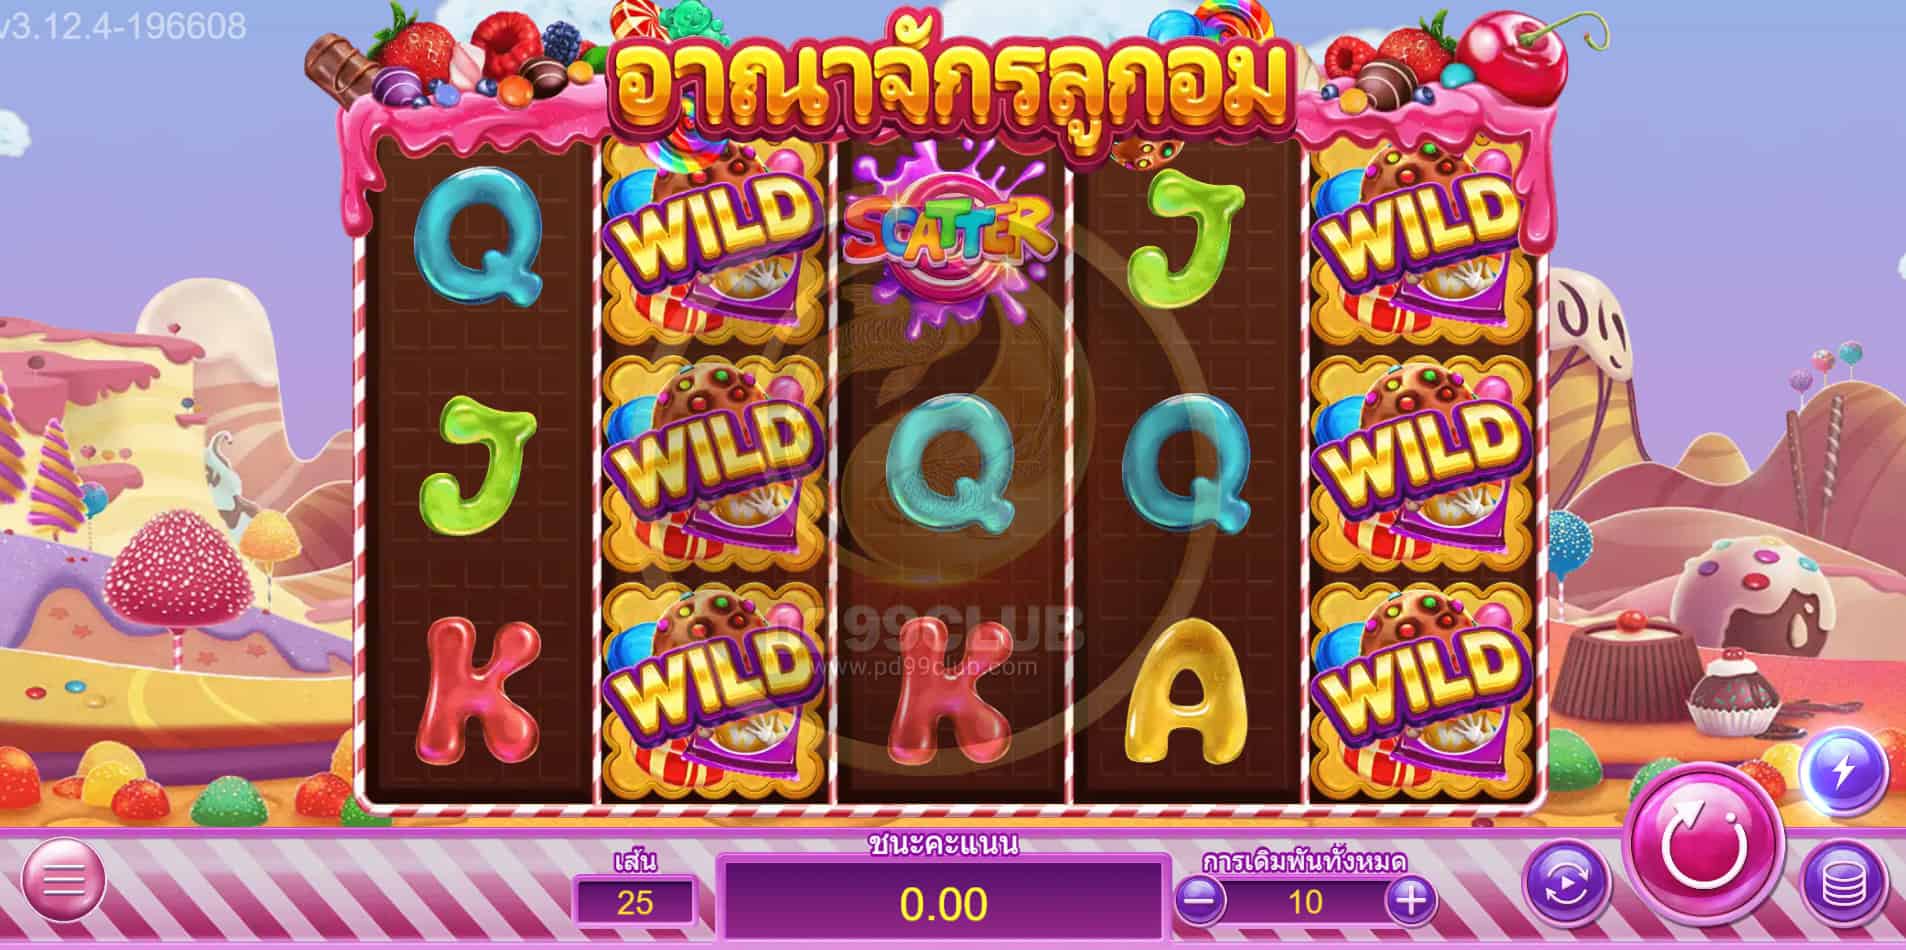 Low Roller on Slots?   Check out Wealth of Dynasty! One of the best penny games to play!